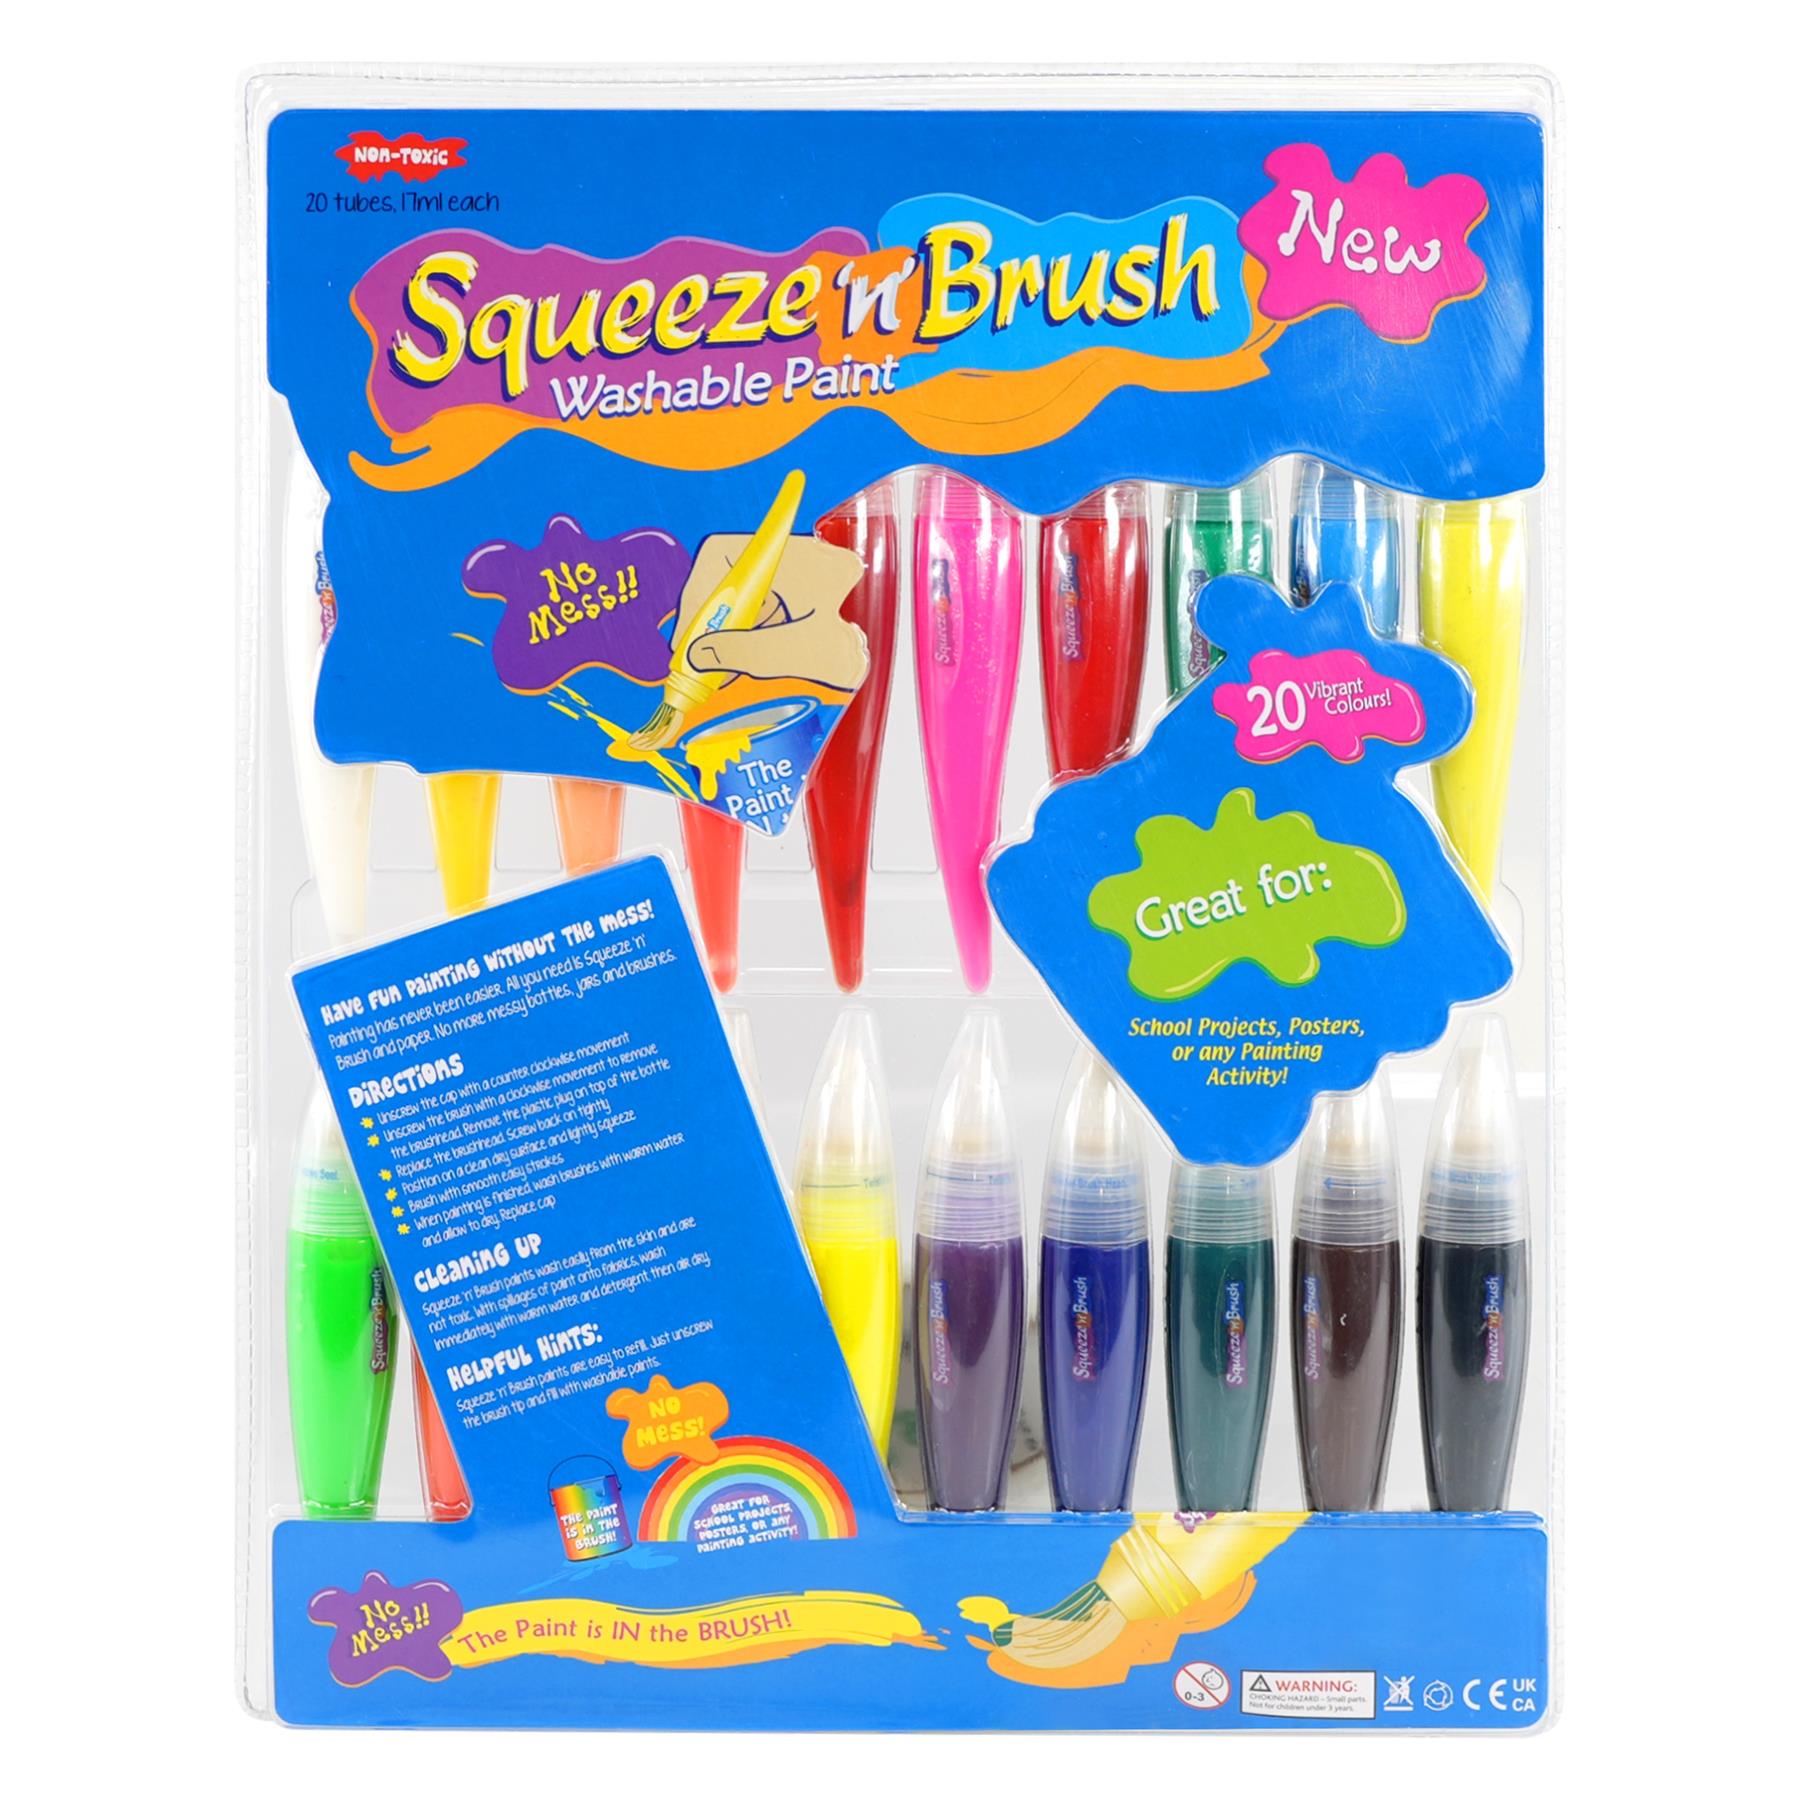 Squeeze n Brush Washable Paint